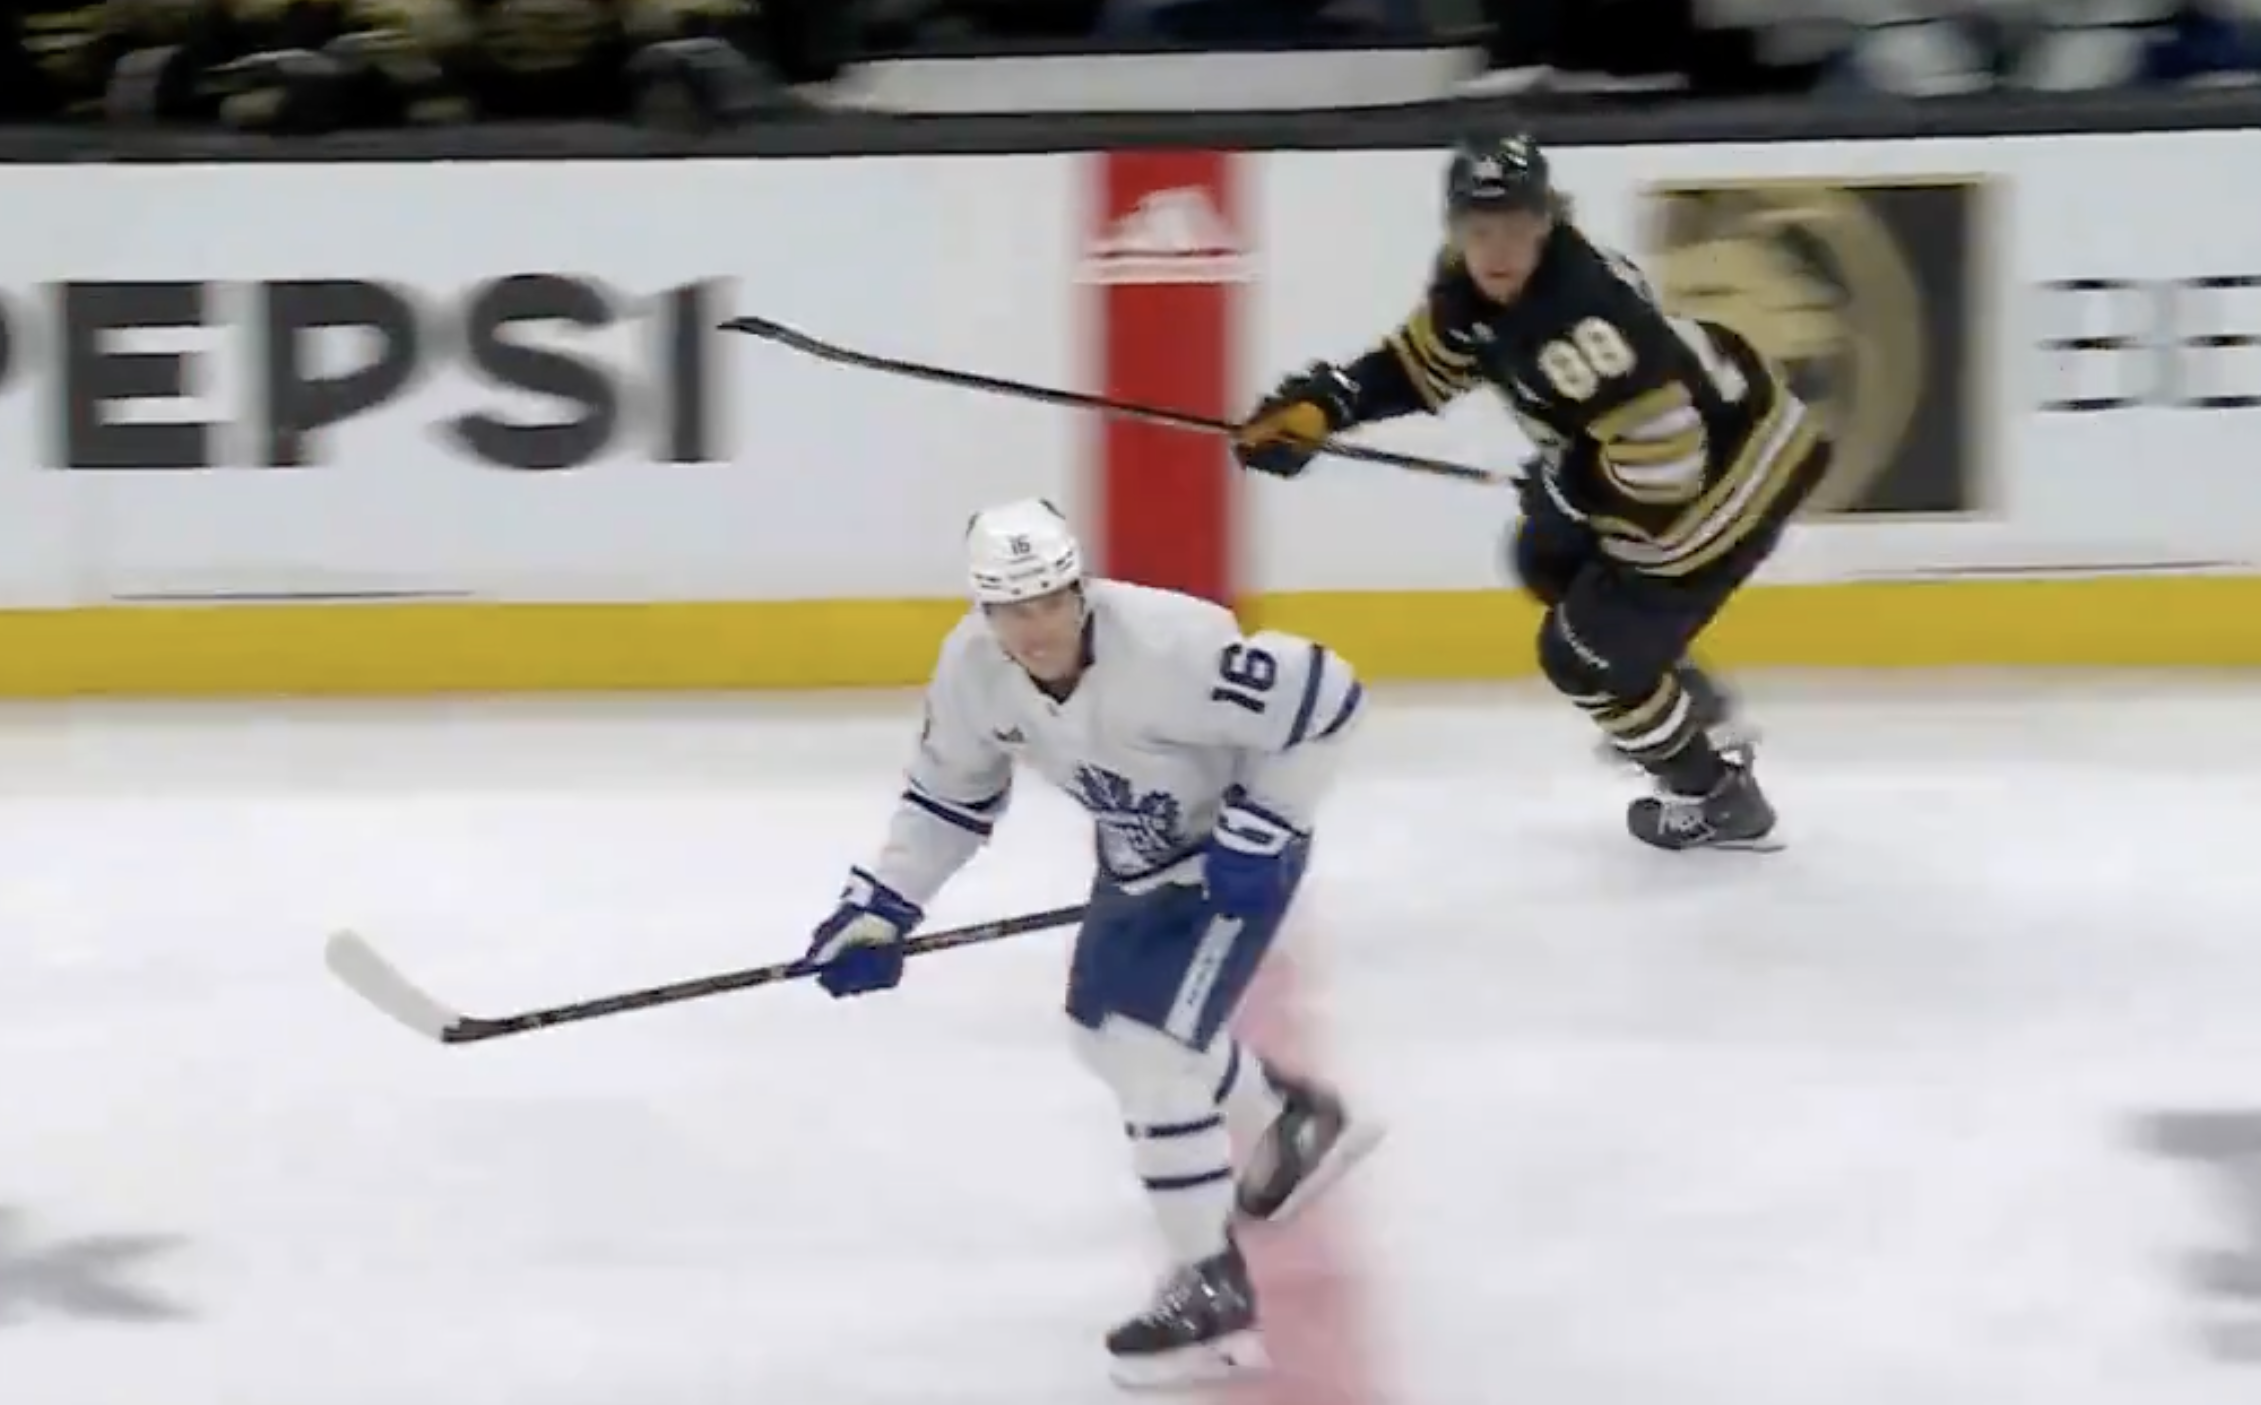 nhl fans ripped mitch marner for his awful back-checking effort on the bruins' game 7 winning goal